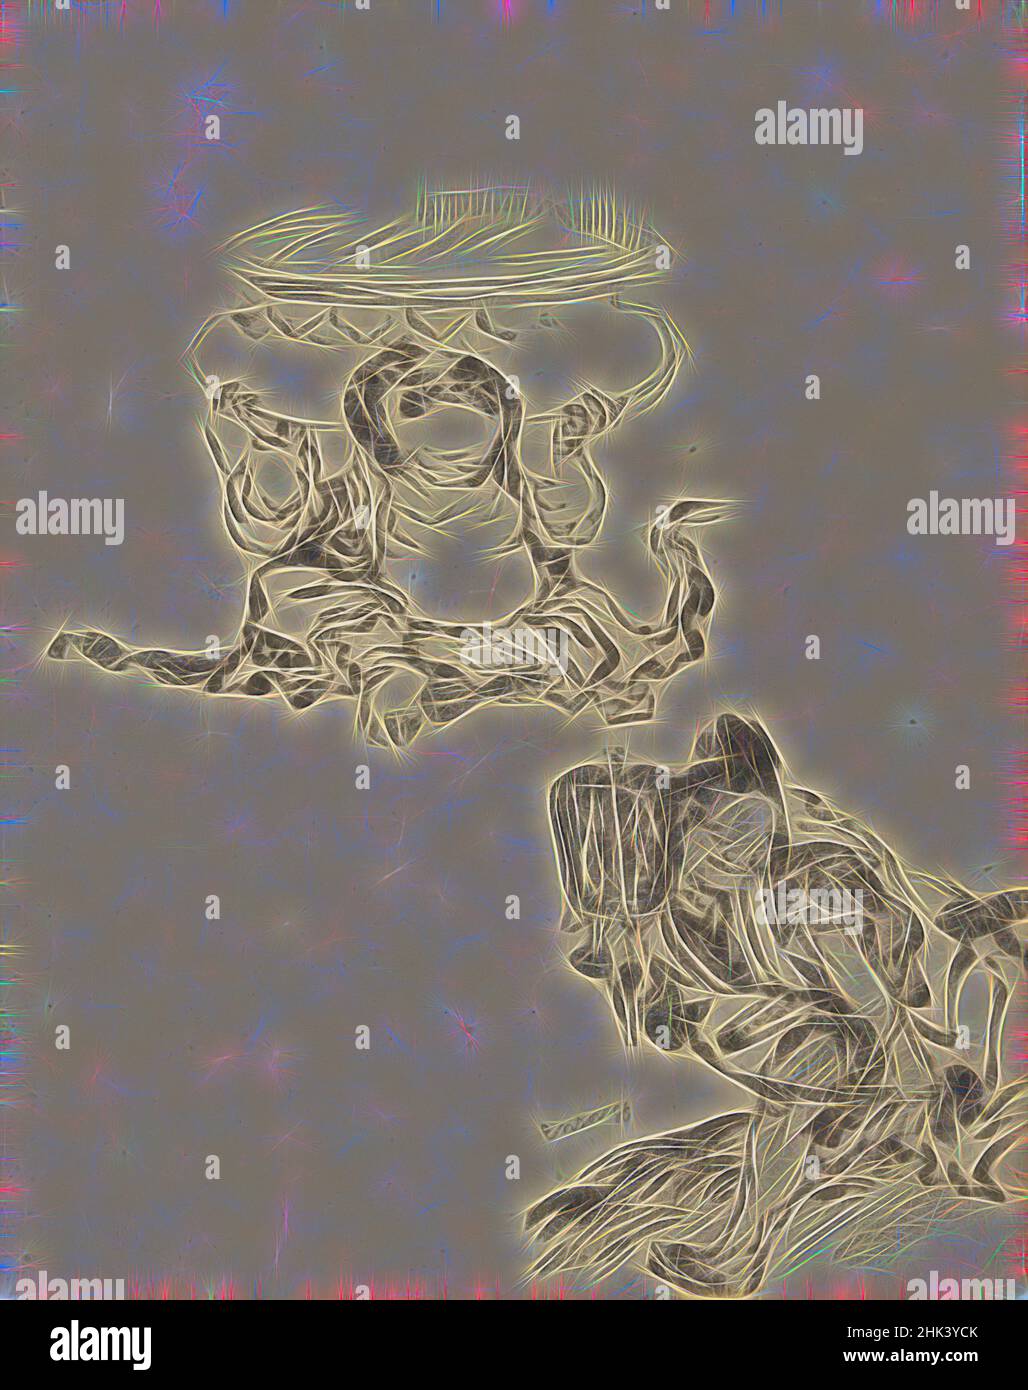 Inspired by Chinoiserie, two figures, James Ensor, 1885, drawing, 1885, Belgian Art, Reimagined by Artotop. Classic art reinvented with a modern twist. Design of warm cheerful glowing of brightness and light ray radiance. Photography inspired by surrealism and futurism, embracing dynamic energy of modern technology, movement, speed and revolutionize culture Stock Photo